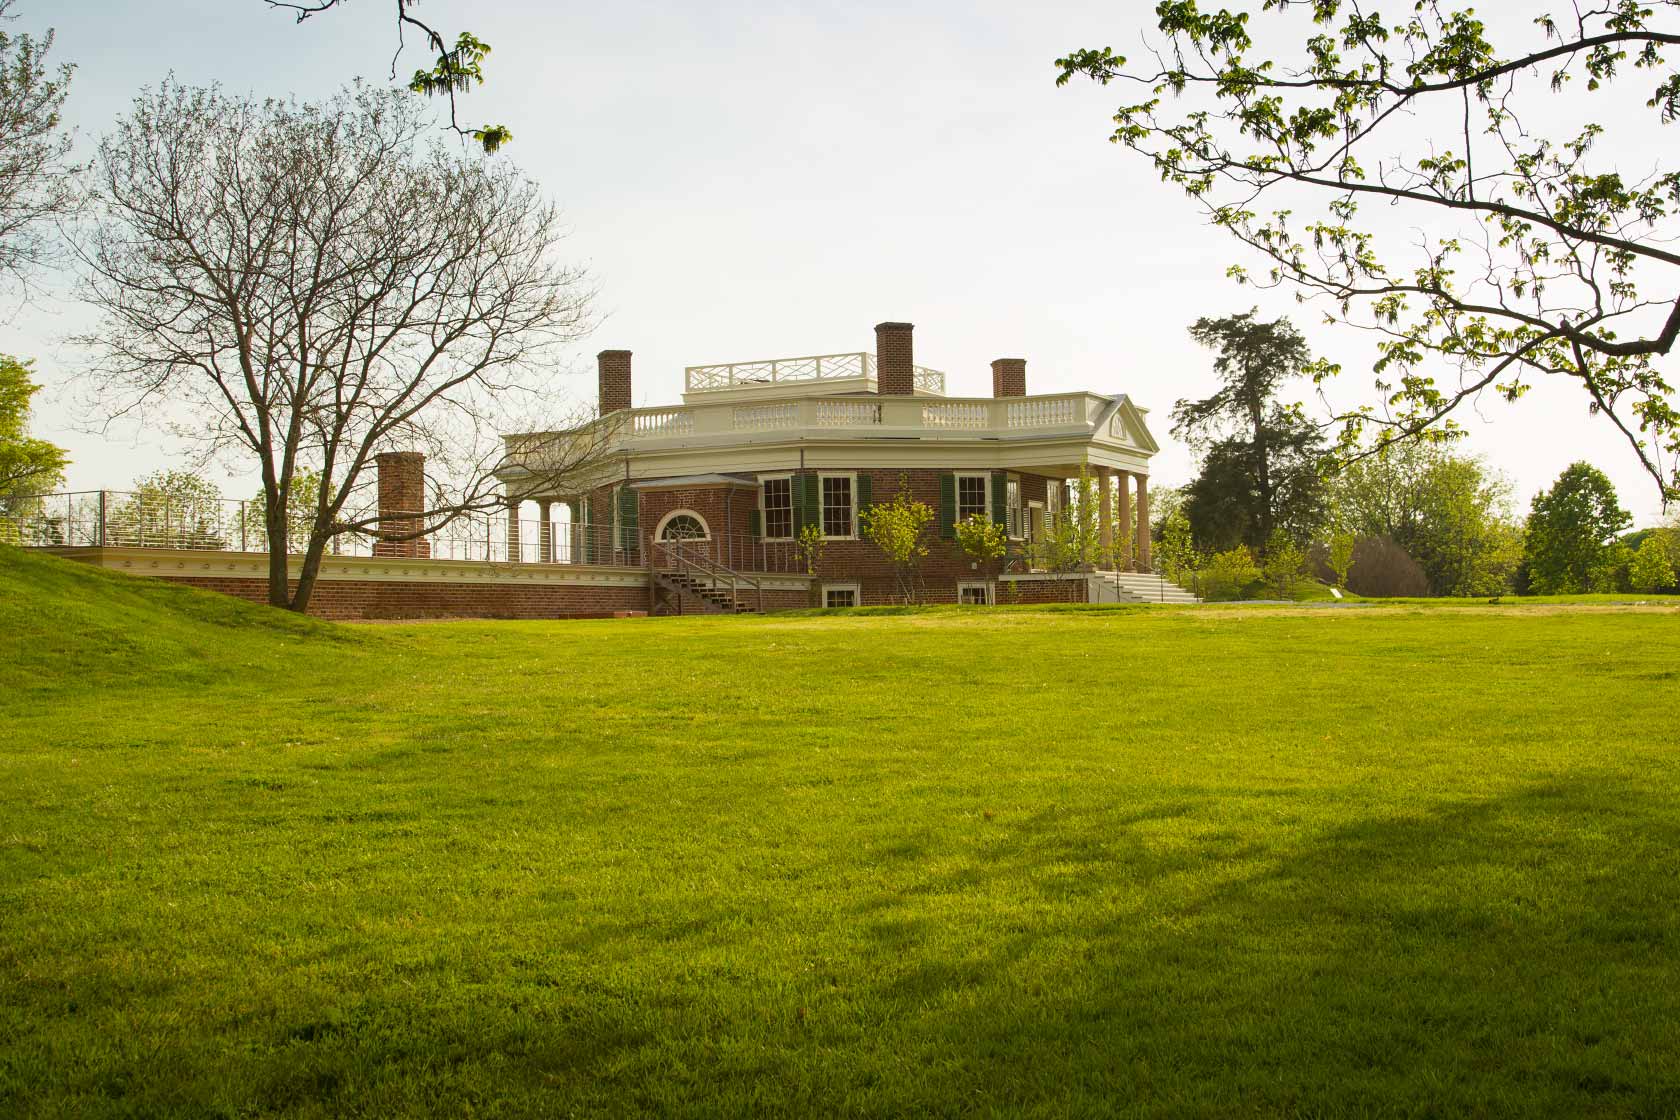 Poplar Forest—ranked among the top historic sites in Virginia—sits among budding trees and spring-green grass.